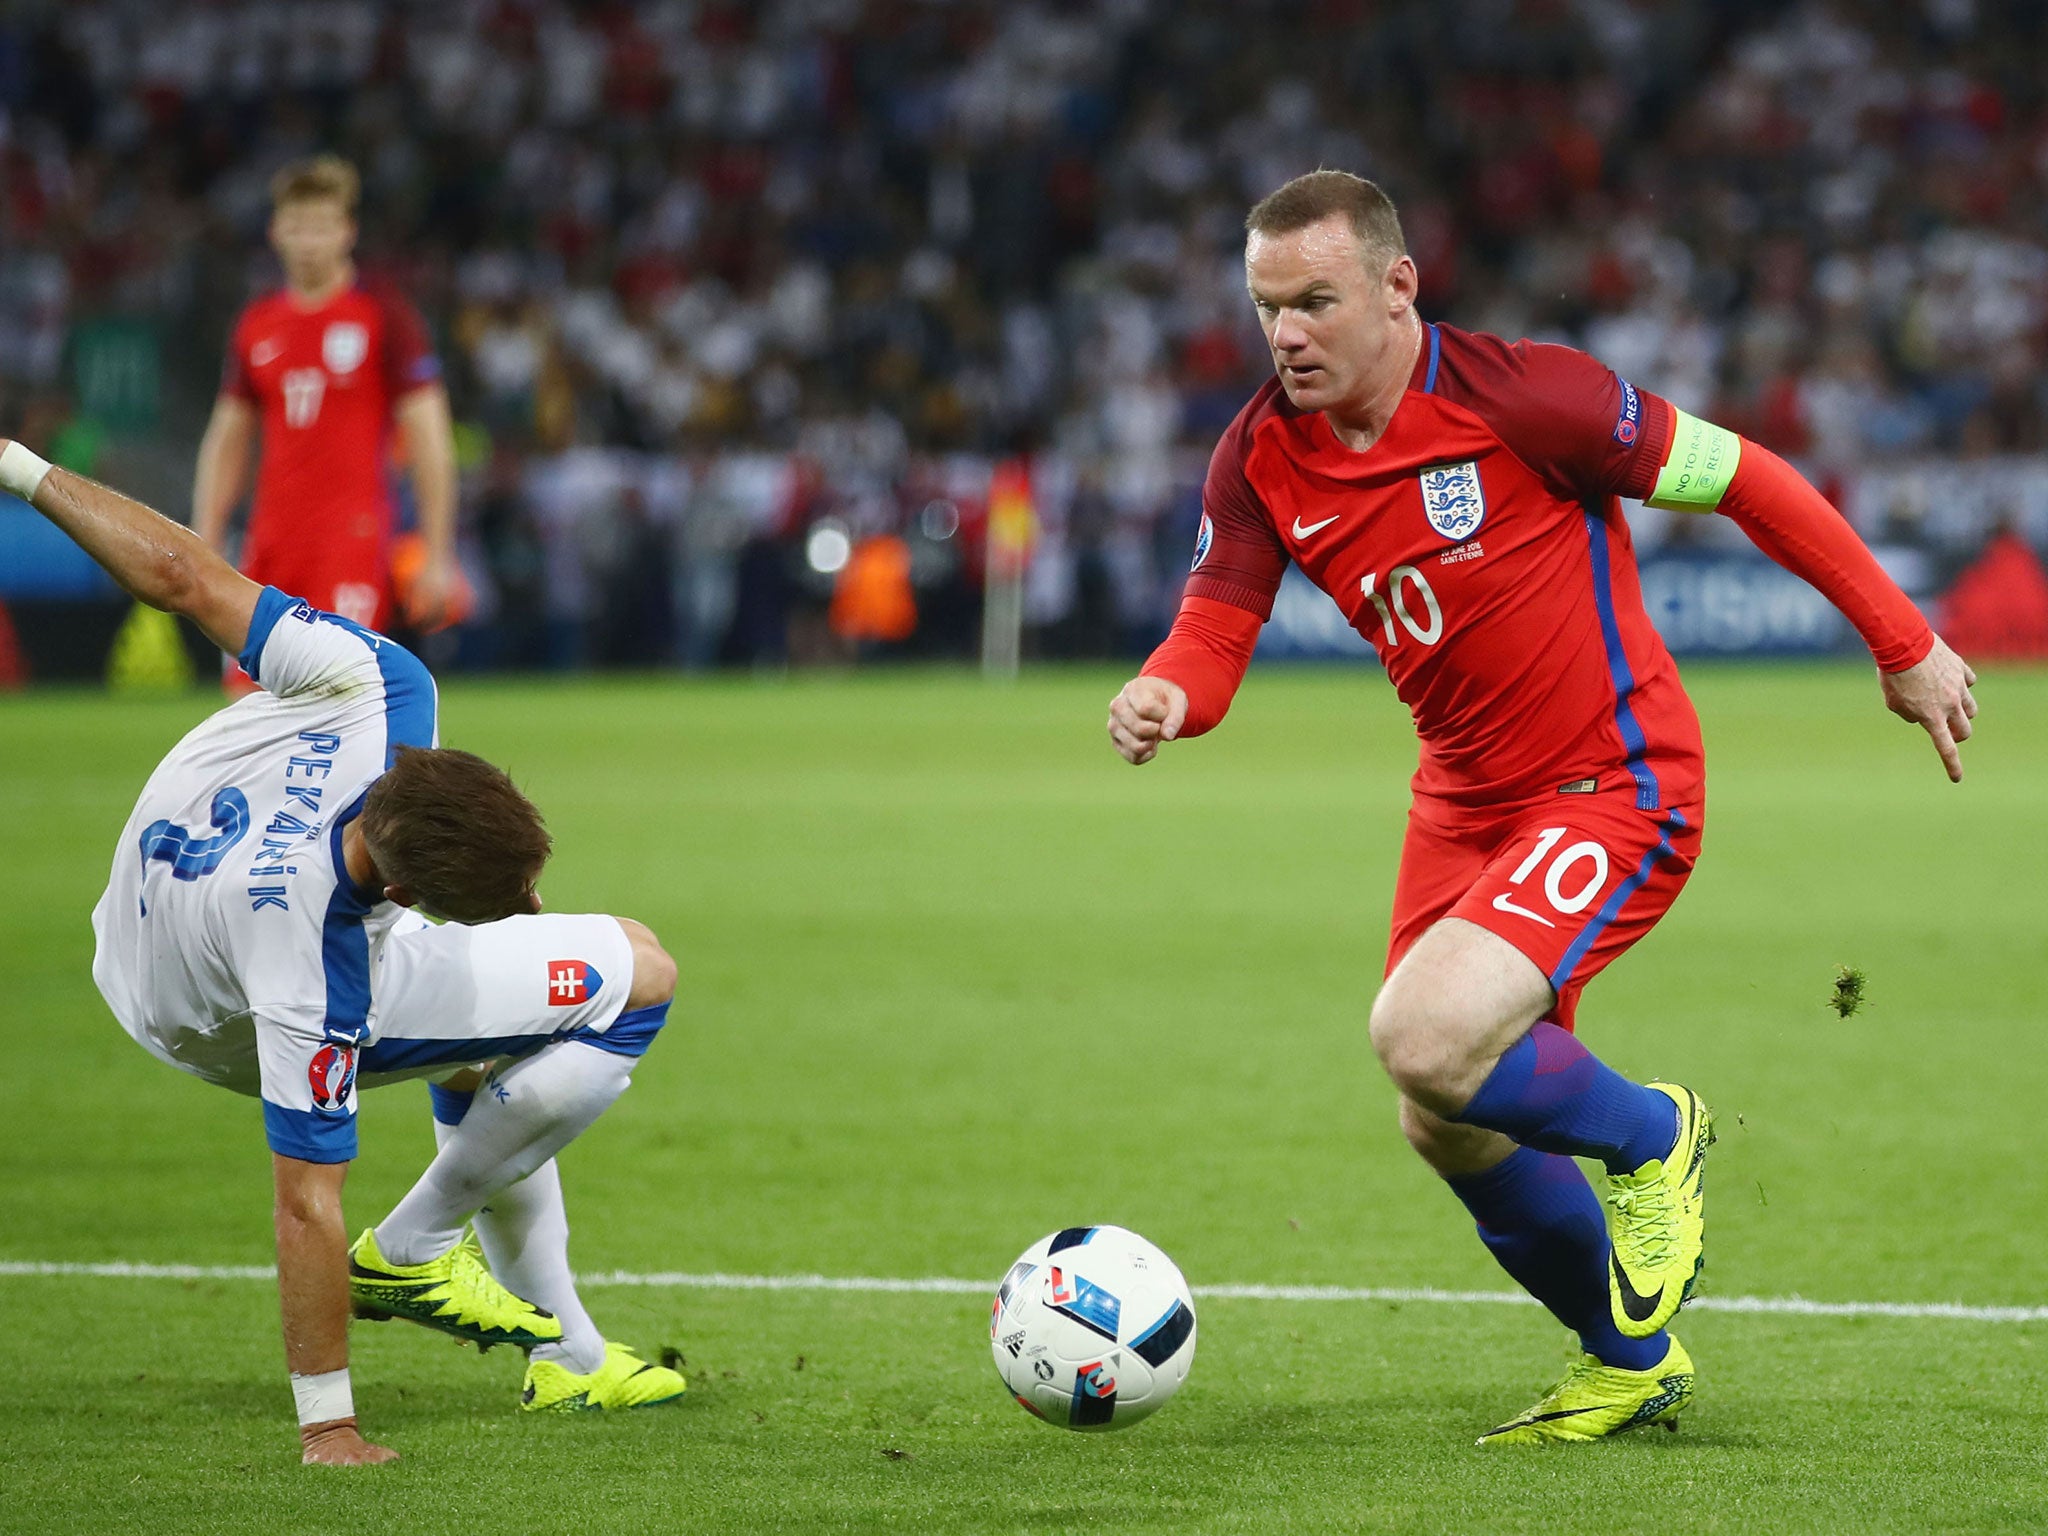 Rooney seizes possession in Monday's fixture against Slovakia